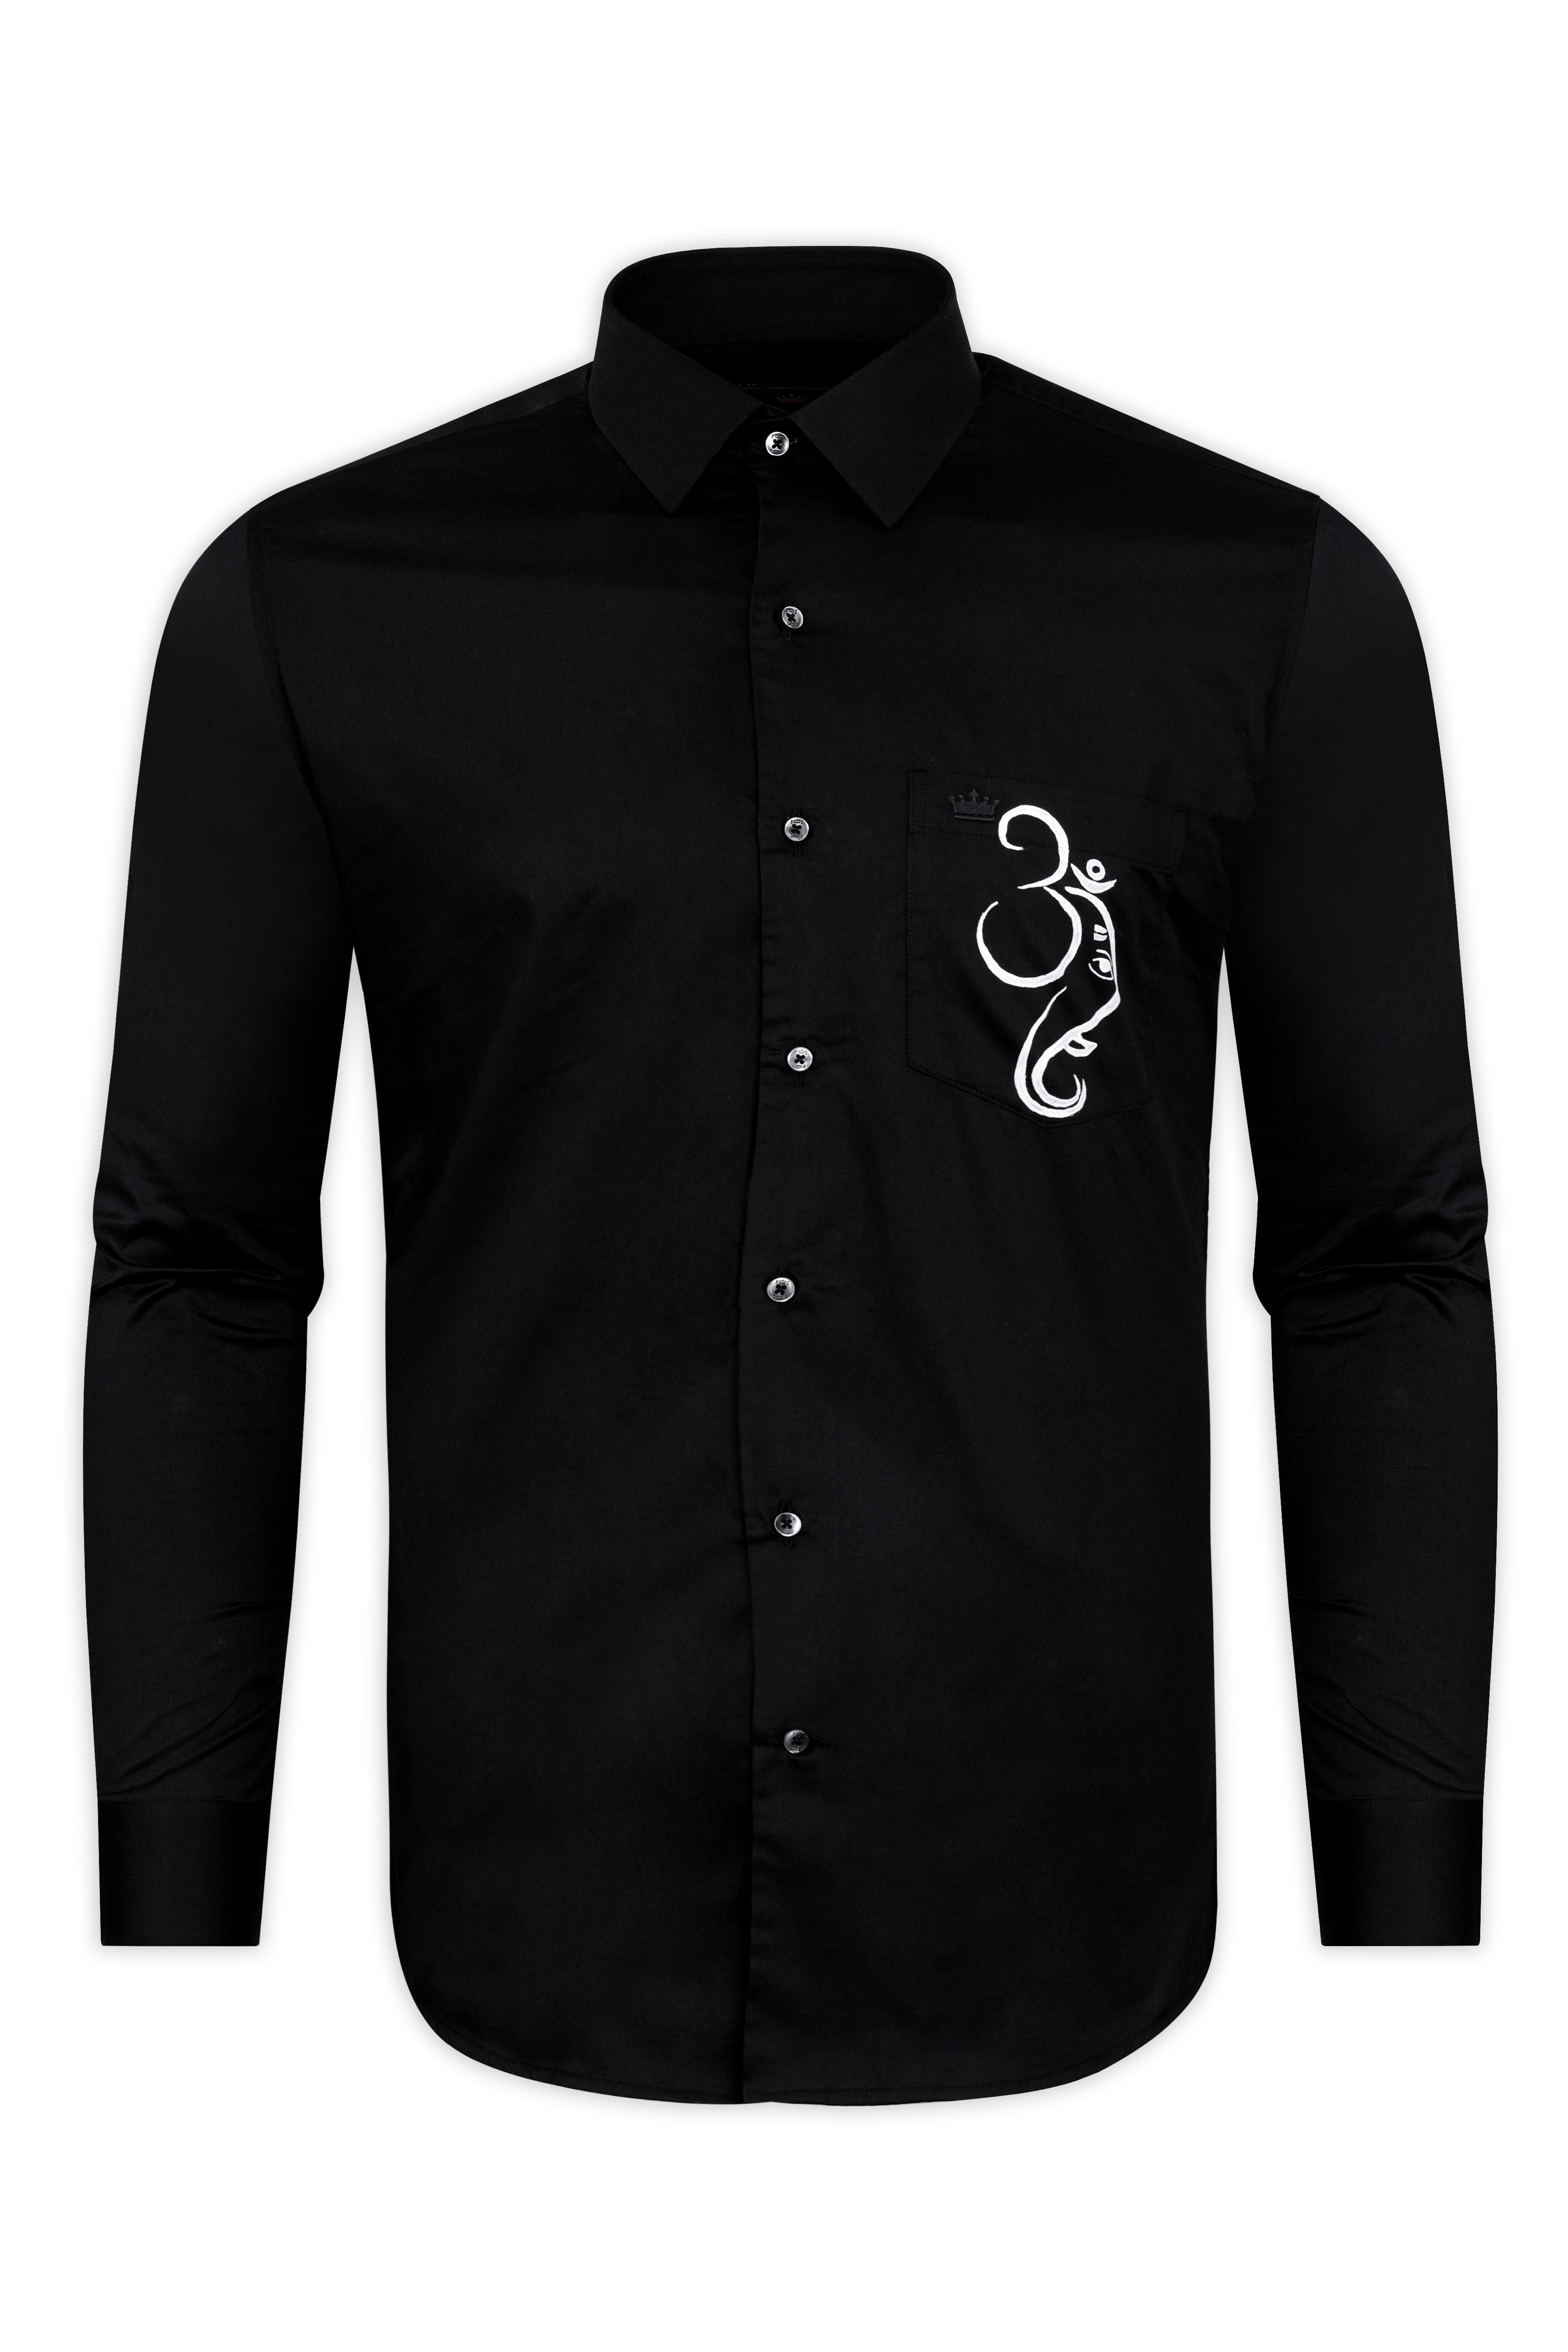 Jade Black with OM and Lord Ganesh Hand Painted Subtle Sheen Super Soft Premium Cotton Designer Shirt 1312-BLK-ART05-38, 1312-BLK-ART05-H-38, 1312-BLK-ART05-39, 1312-BLK-ART05-H-39, 1312-BLK-ART05-40, 1312-BLK-ART05-H-40, 1312-BLK-ART05-42, 1312-BLK-ART05-H-42, 1312-BLK-ART05-44, 1312-BLK-ART05-H-44, 1312-BLK-ART05-46, 1312-BLK-ART05-H-46, 1312-BLK-ART05-48, 1312-BLK-ART05-H-48, 1312-BLK-ART05-50, 1312-BLK-ART05-H-50, 1312-BLK-ART05-52, 1312-BLK-ART05-H-52